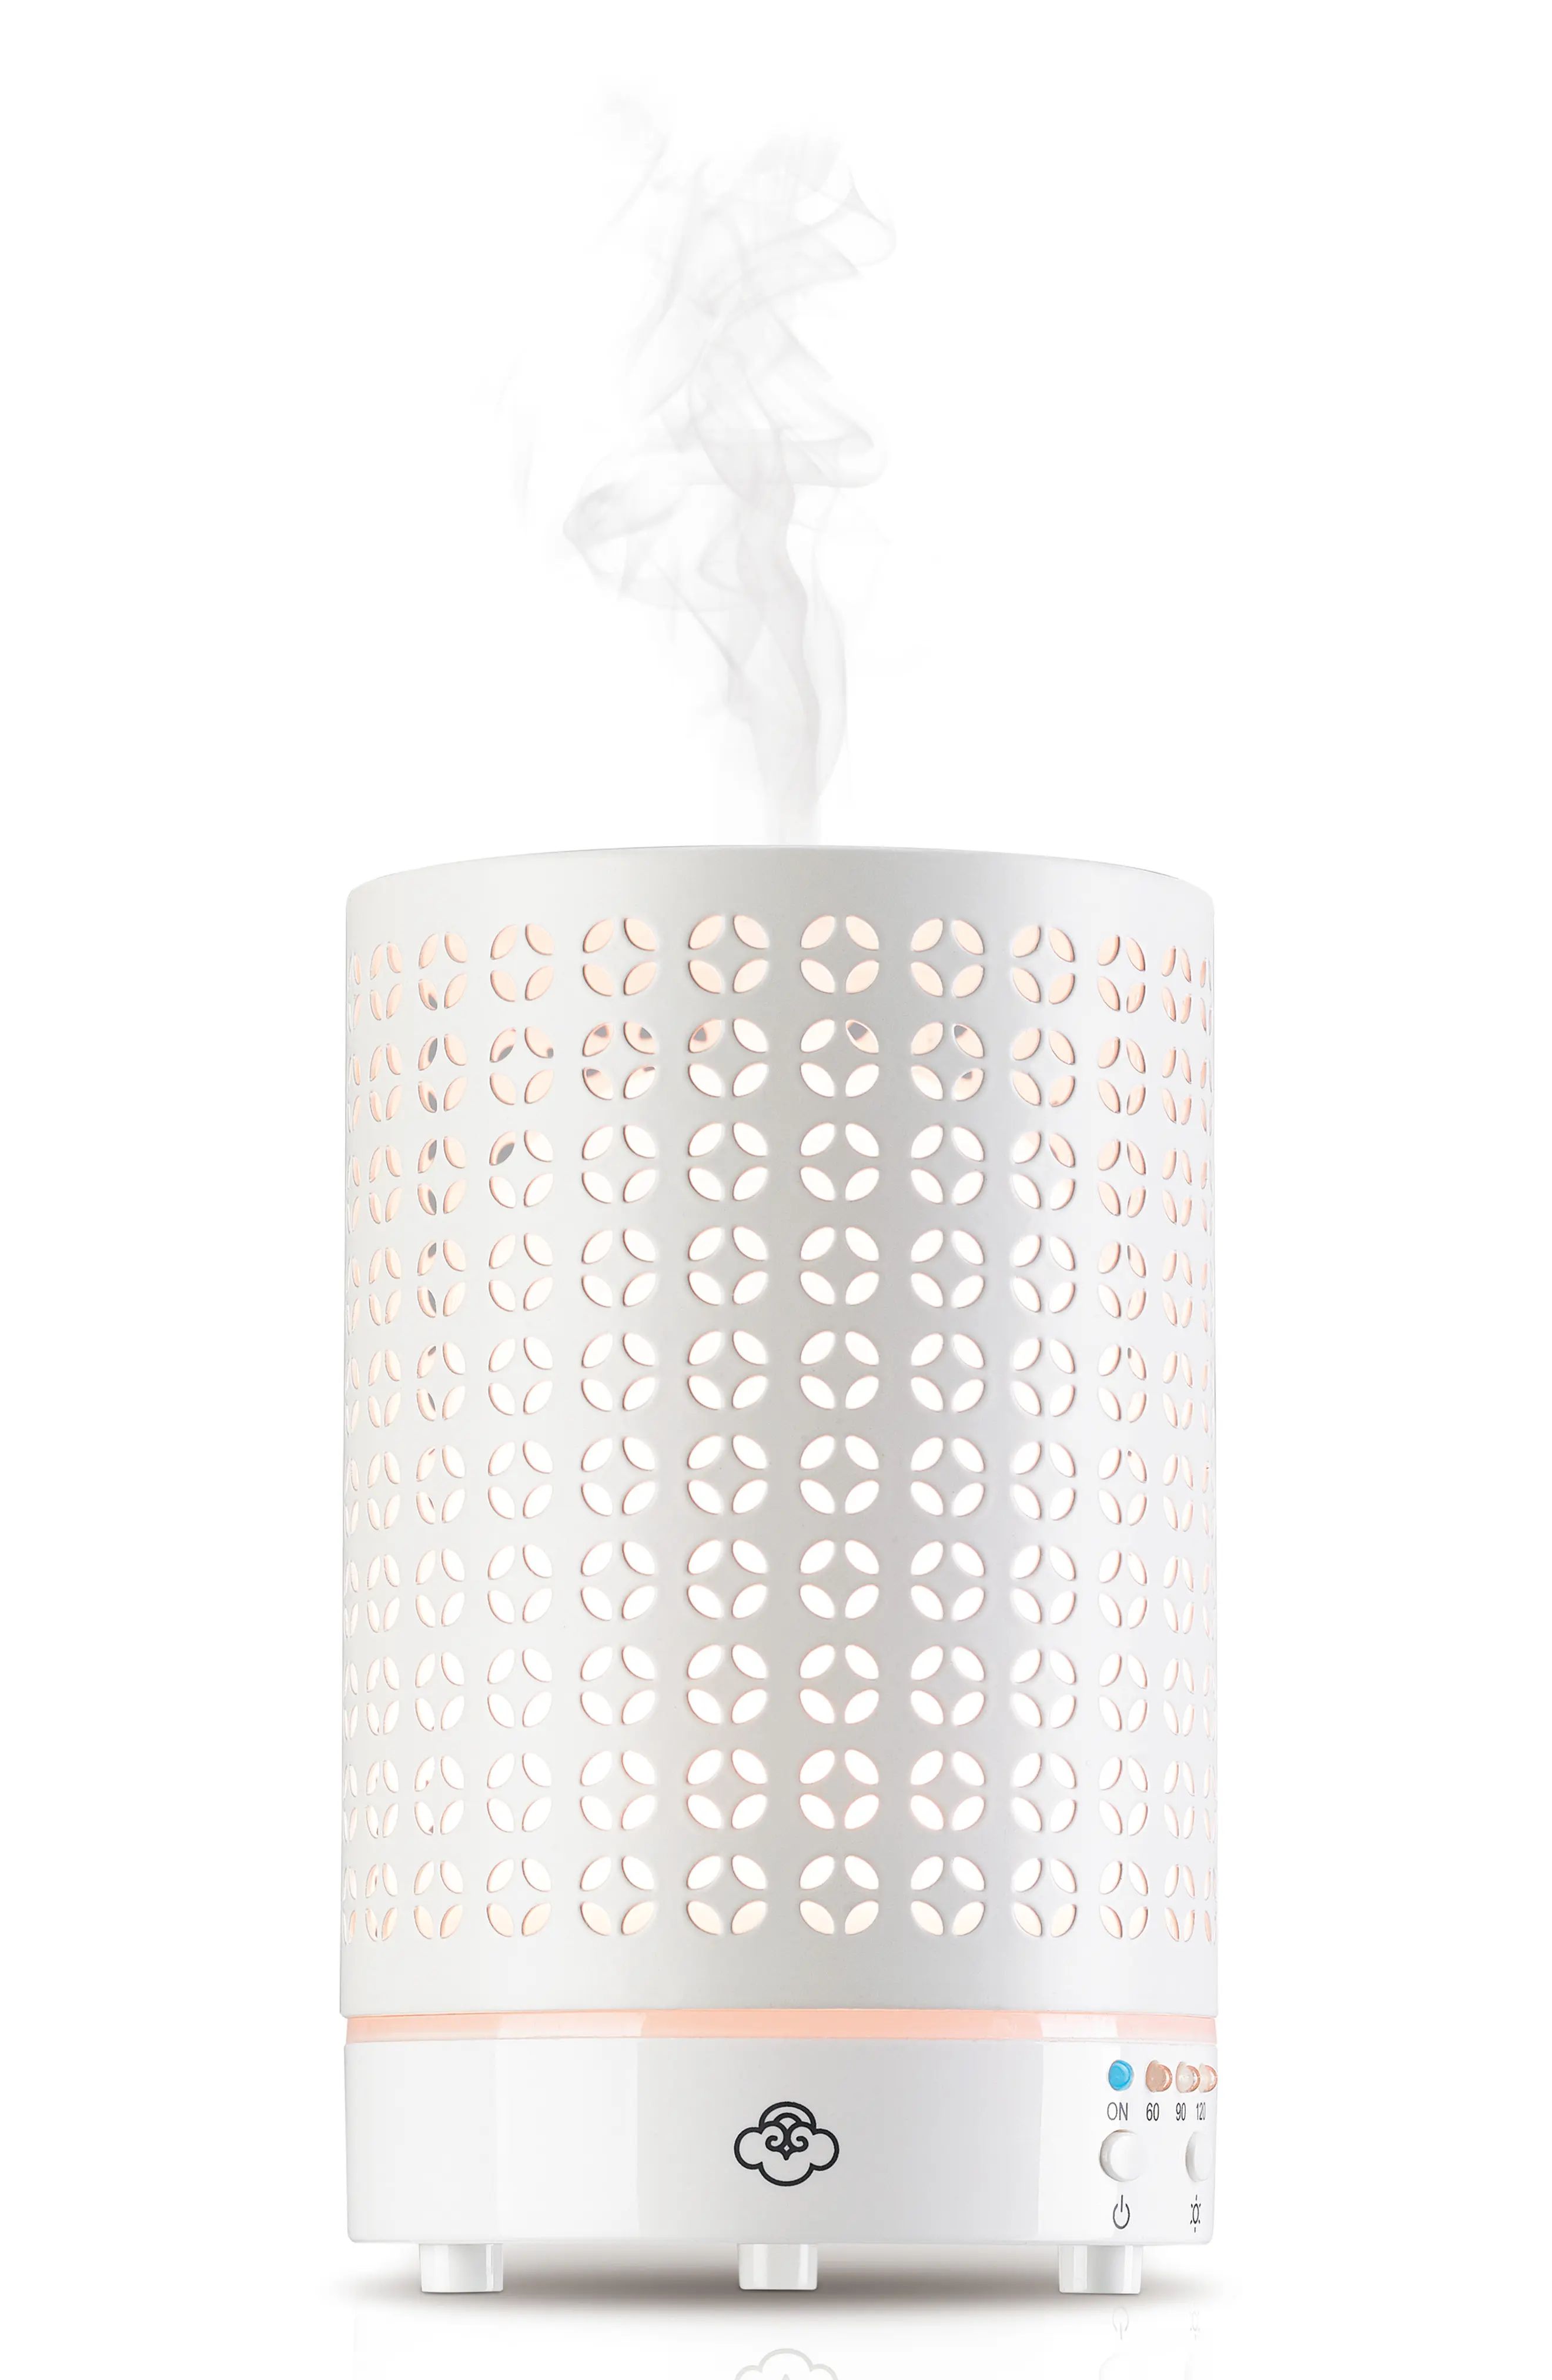 SERENE HOUSE Cool Mist Cosmos Scentilizer Ultrasonic Aroma Diffuser | Nordstrom